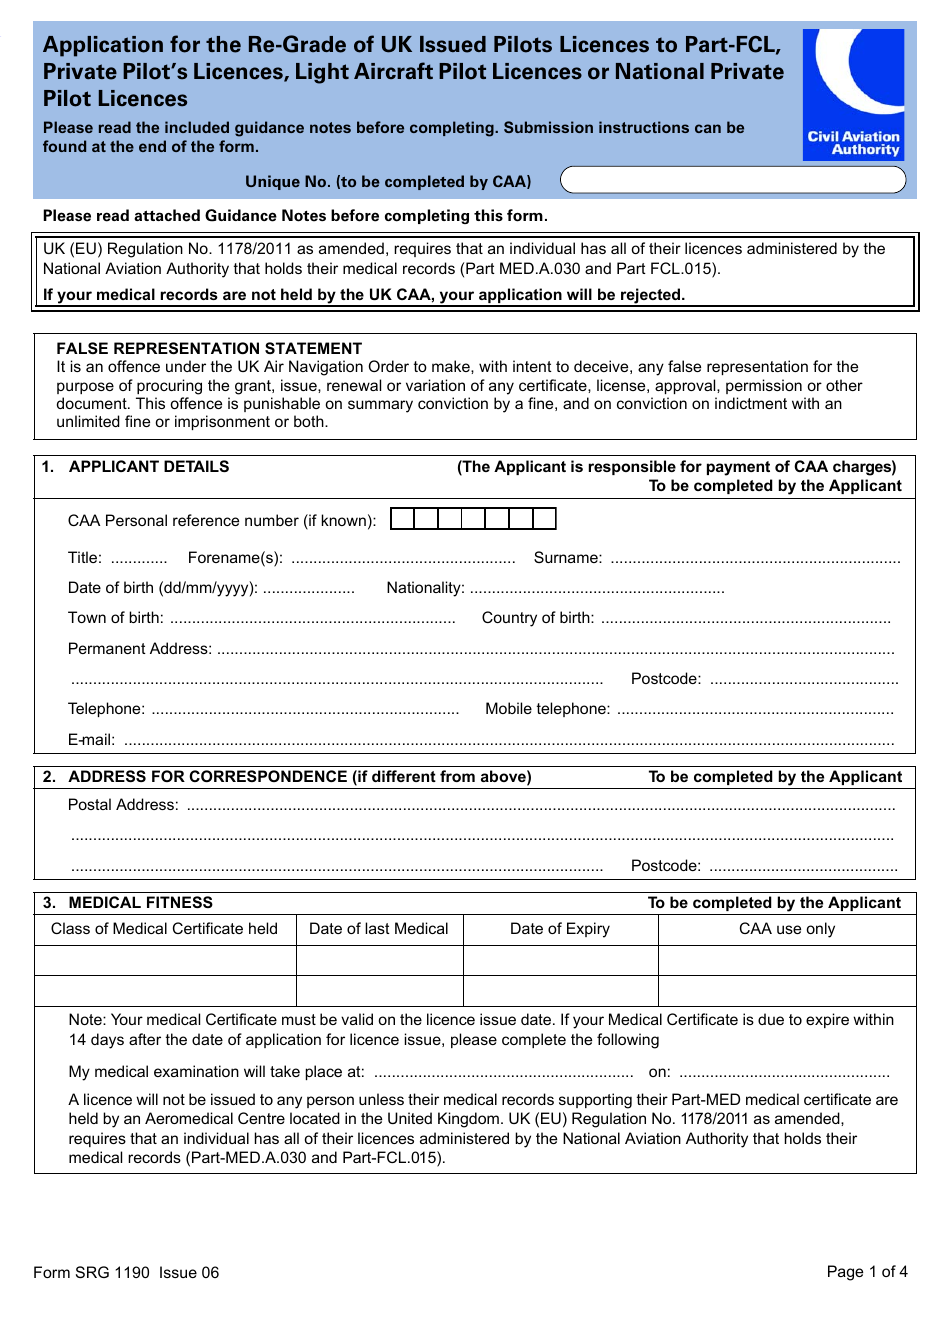 Form SRG1190 Application for the Re-grade of UK Issued Pilots Licences to Part-Fcl, Private Pilots Licences, Light Aircraft Pilot Licences or National Private Pilot Licences - United Kingdom, Page 1